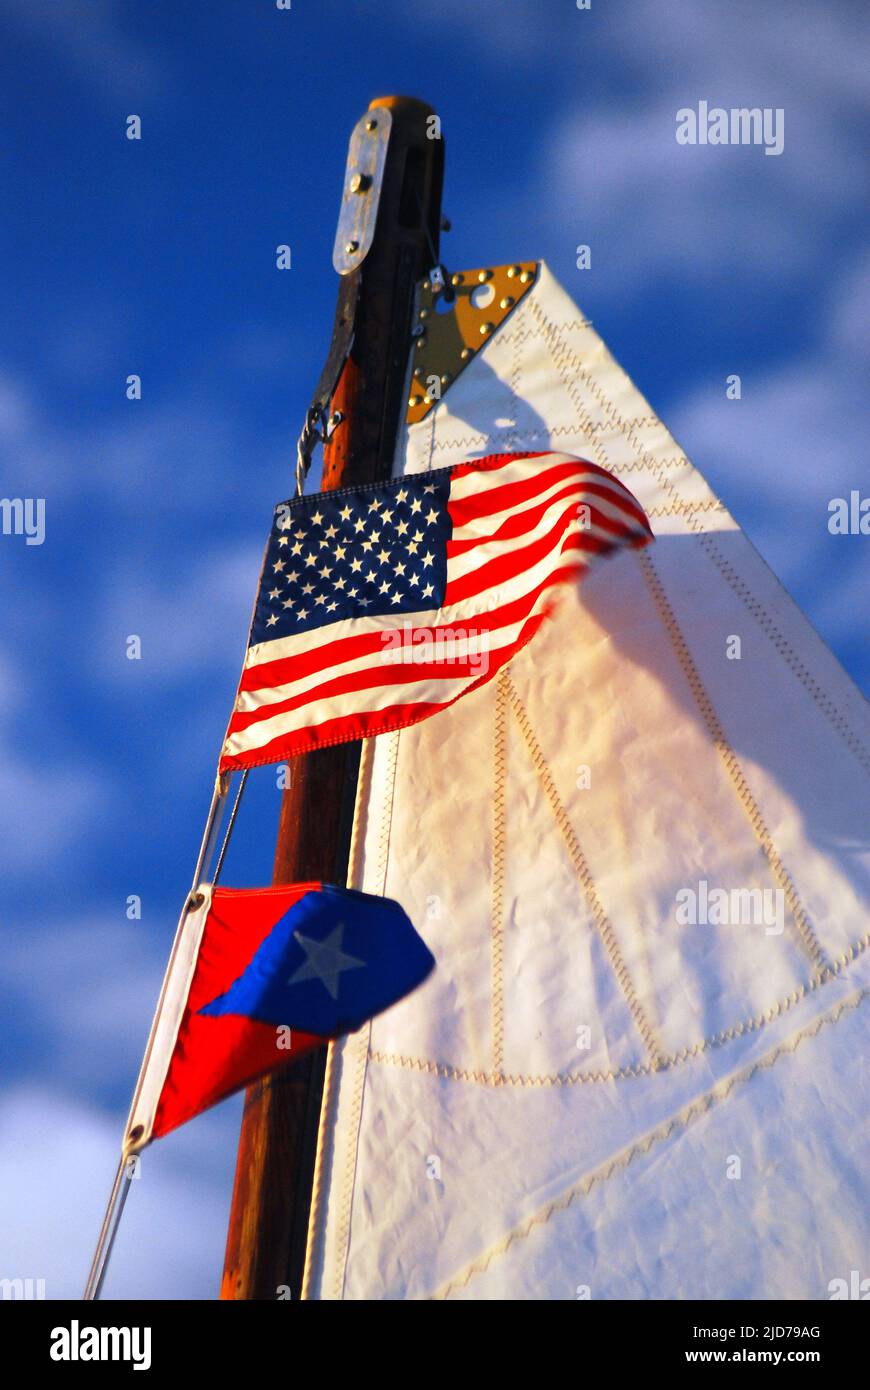 An American flag and the banner of the Red Bank Yacht Club fly at the top of a mast on an Ice yacht Stock Photo